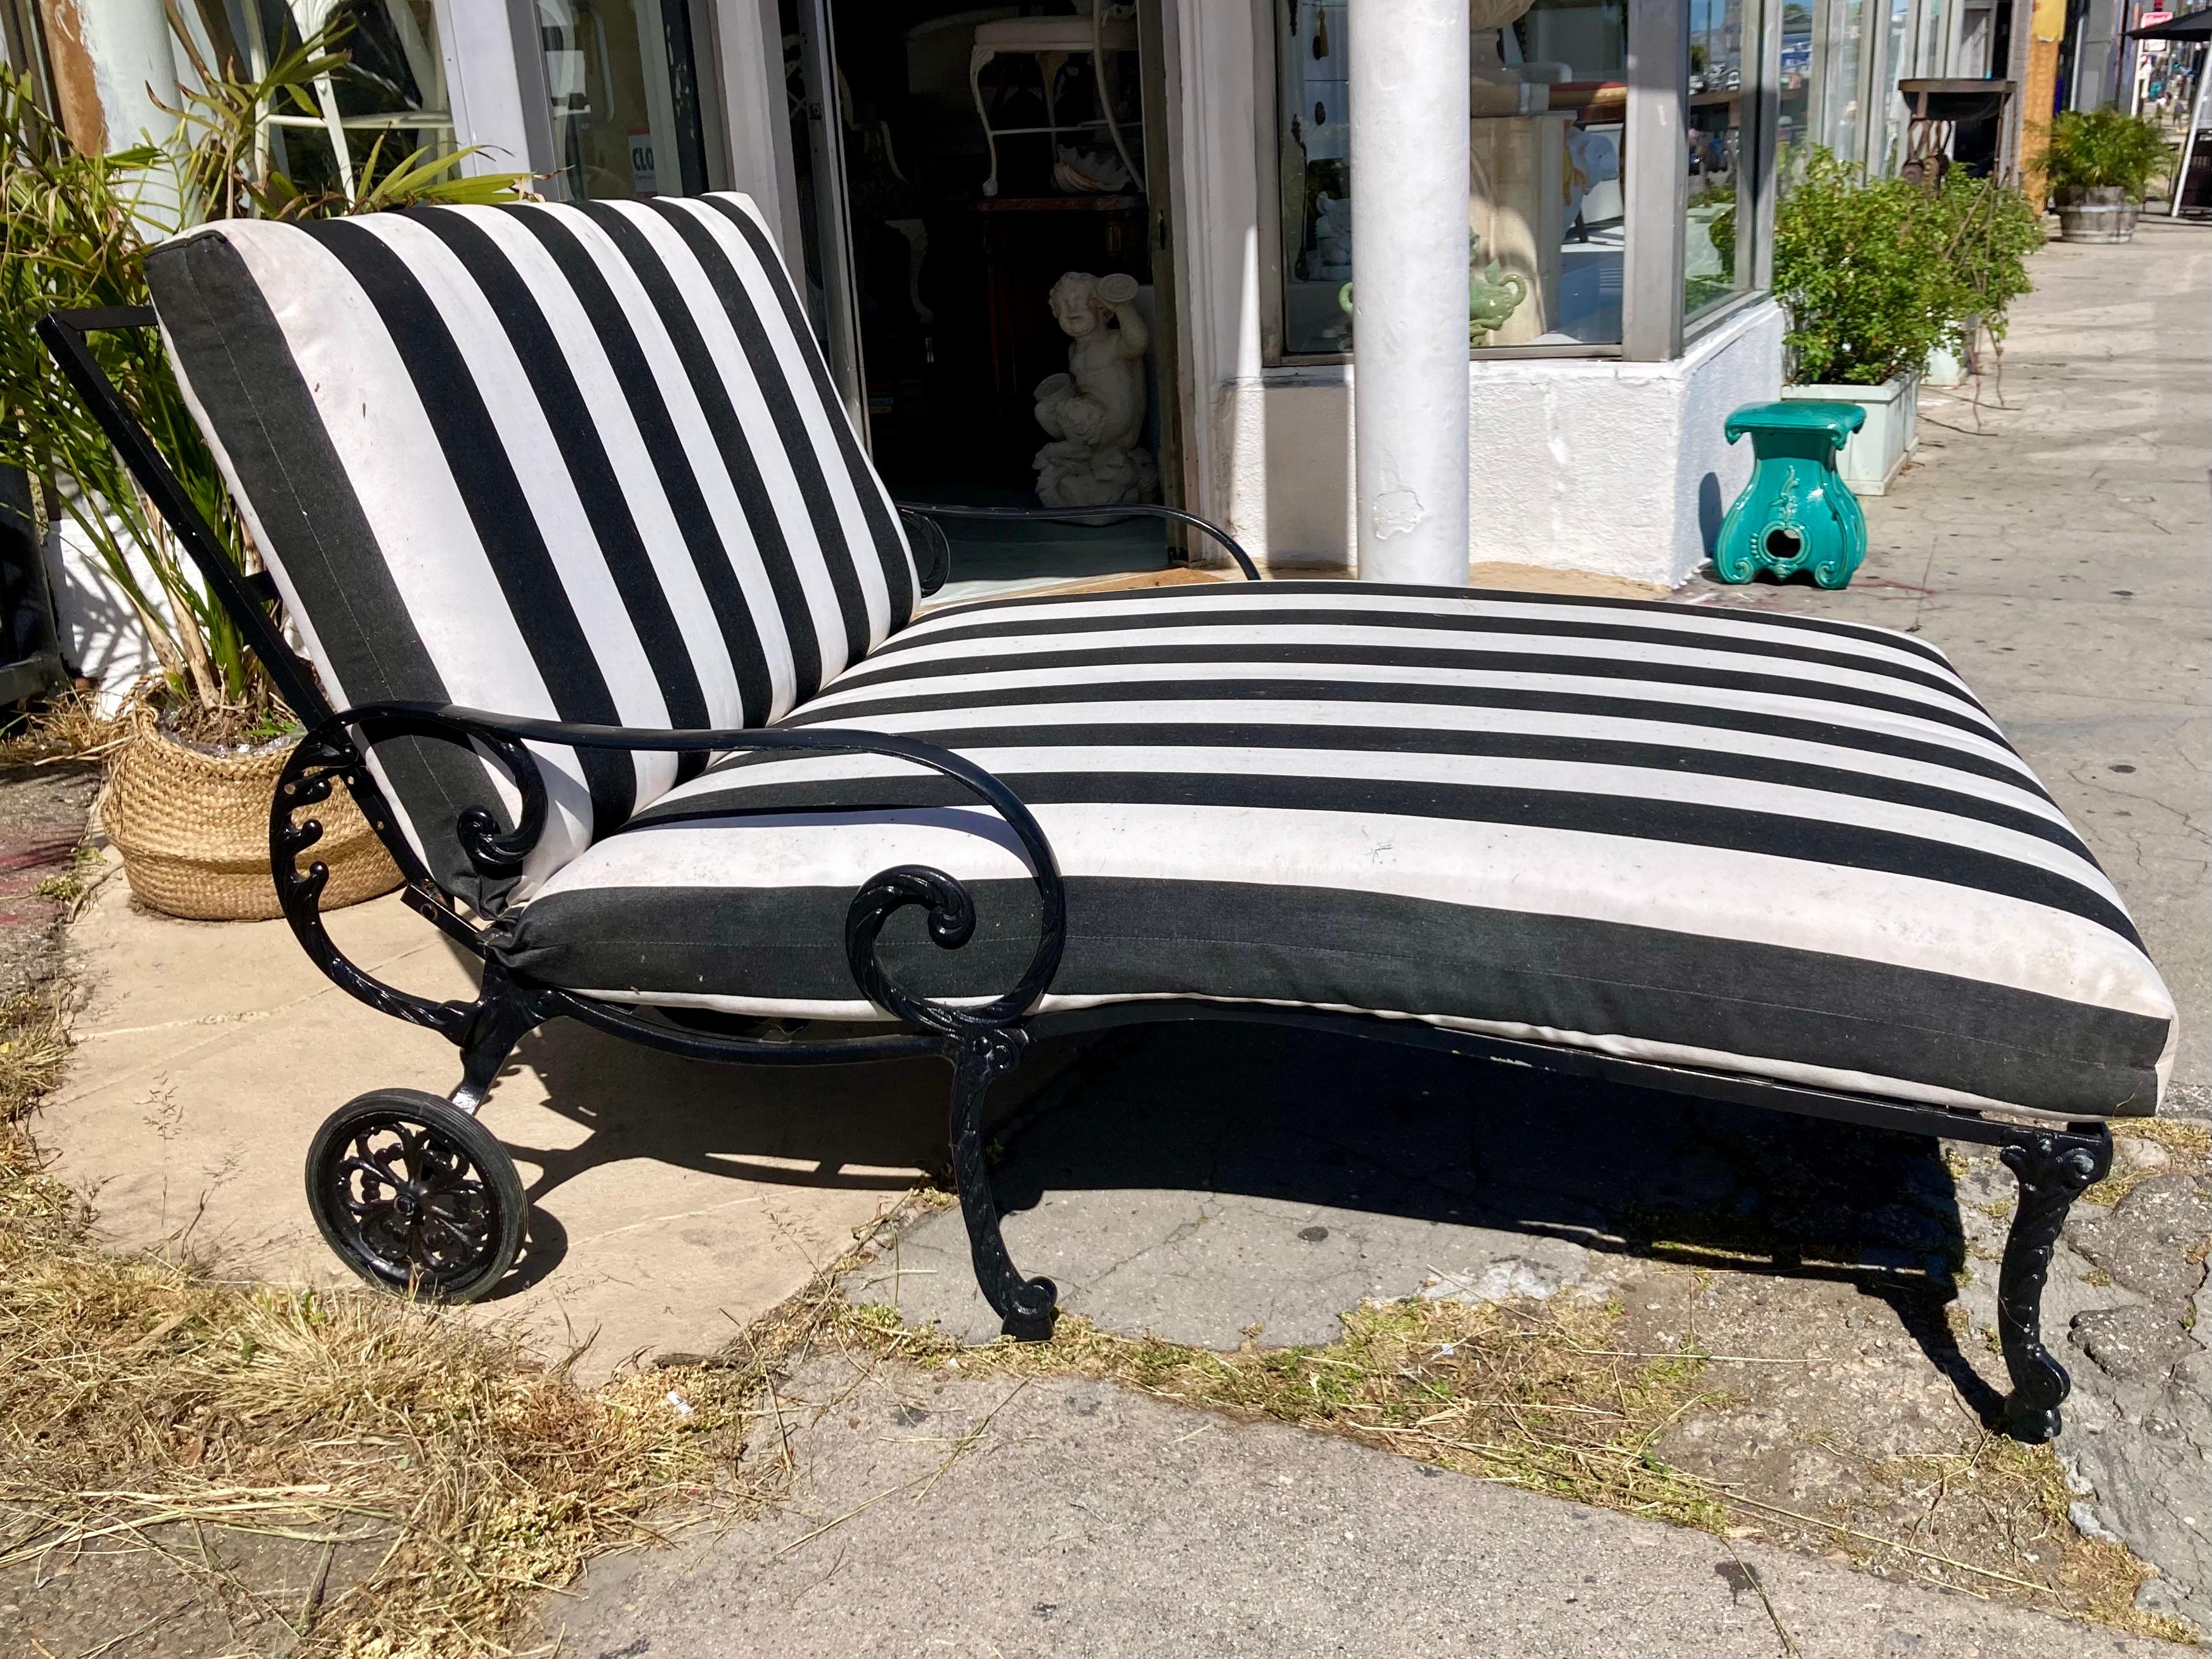 Beautiful Hollywood Regency patio double chaise for 2 persons with cushions. Great addition to your patio and outdoors. Black and white Sunbrella fabric on cushion, so easy to add other pieces with same fabric. We specialize in this Hollywood